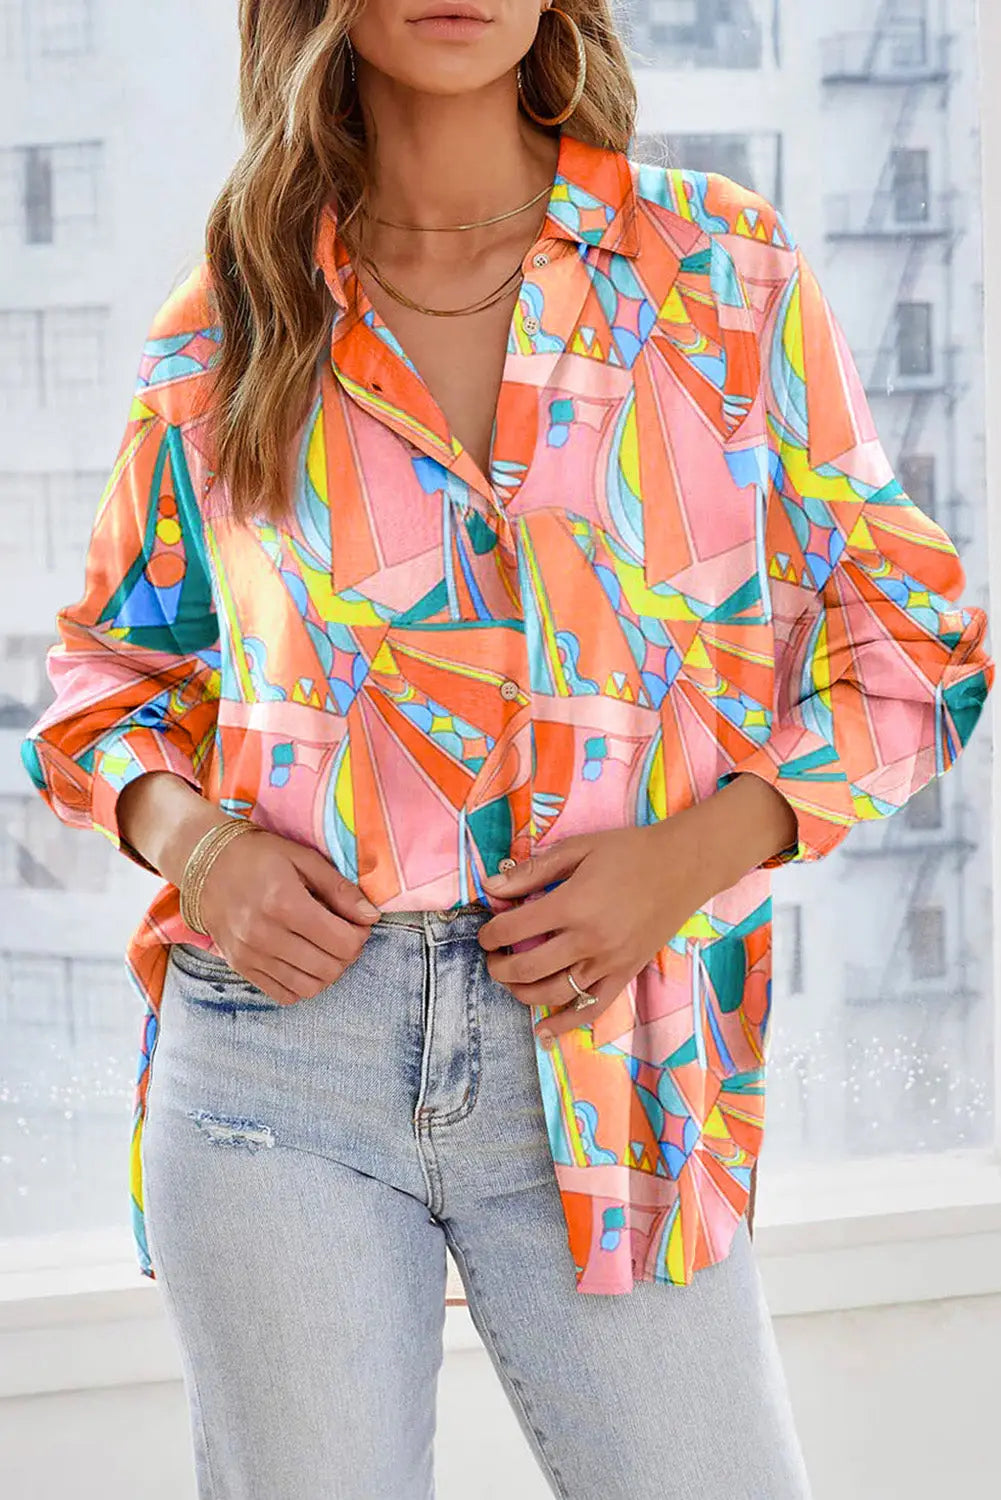 Multicolor geometric abstract print long sleeve shirt dress - multicolor6 / s 100% polyester mini dresses